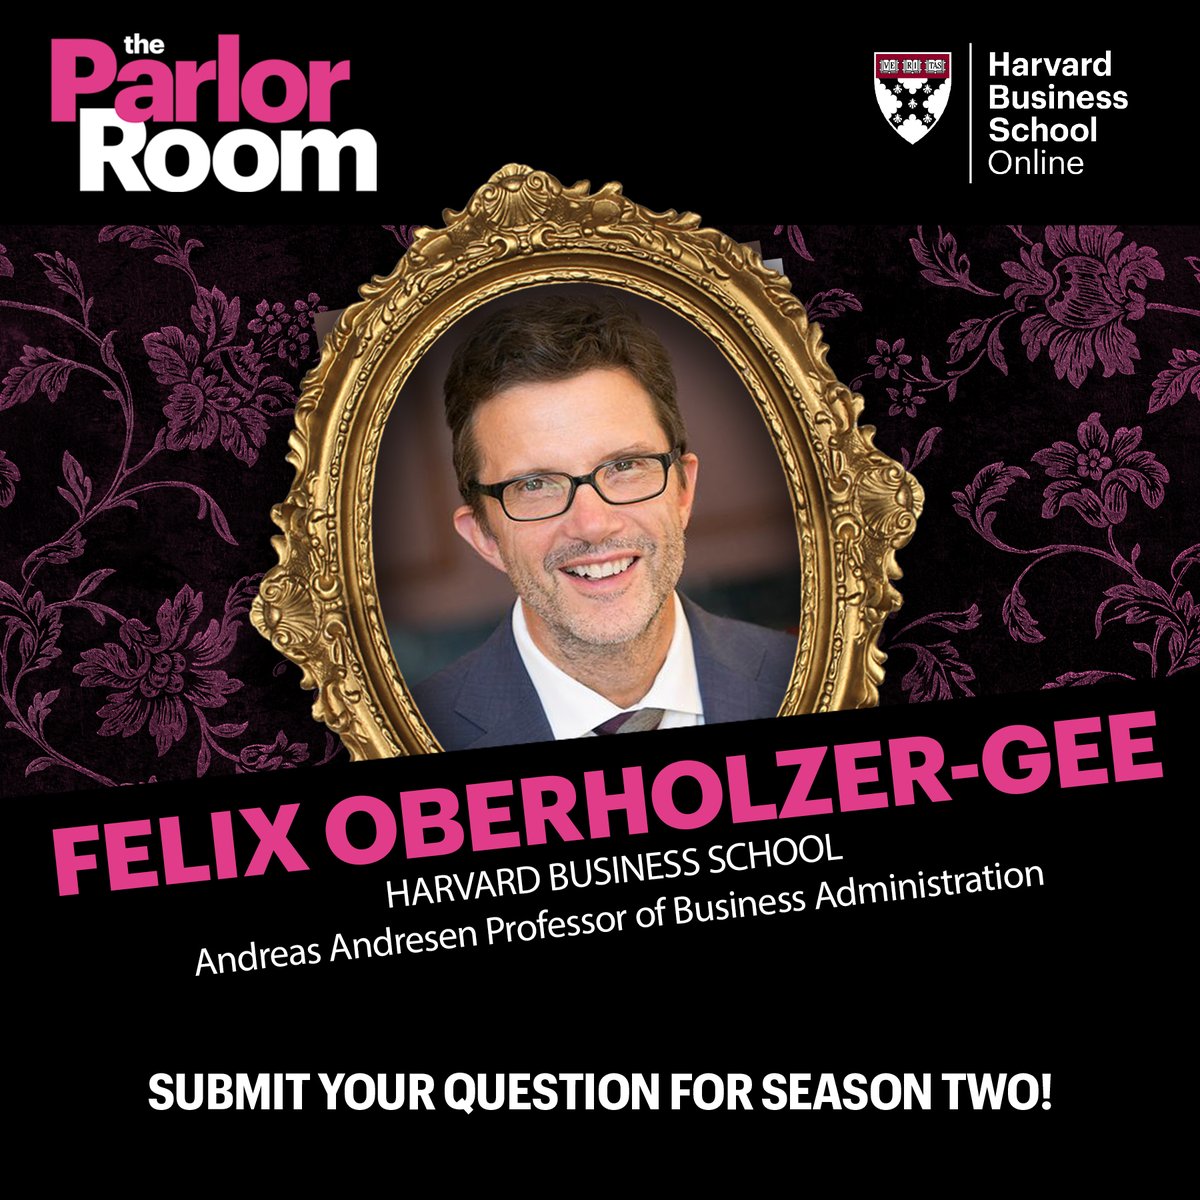 We're excited to interview HBS Professor @fogathbs for the upcoming season of #TheParlorRoom podcast. His academic work focuses on competitive strategy and digital technology's effects on corporate performance. Submit your questions for him in the comments.